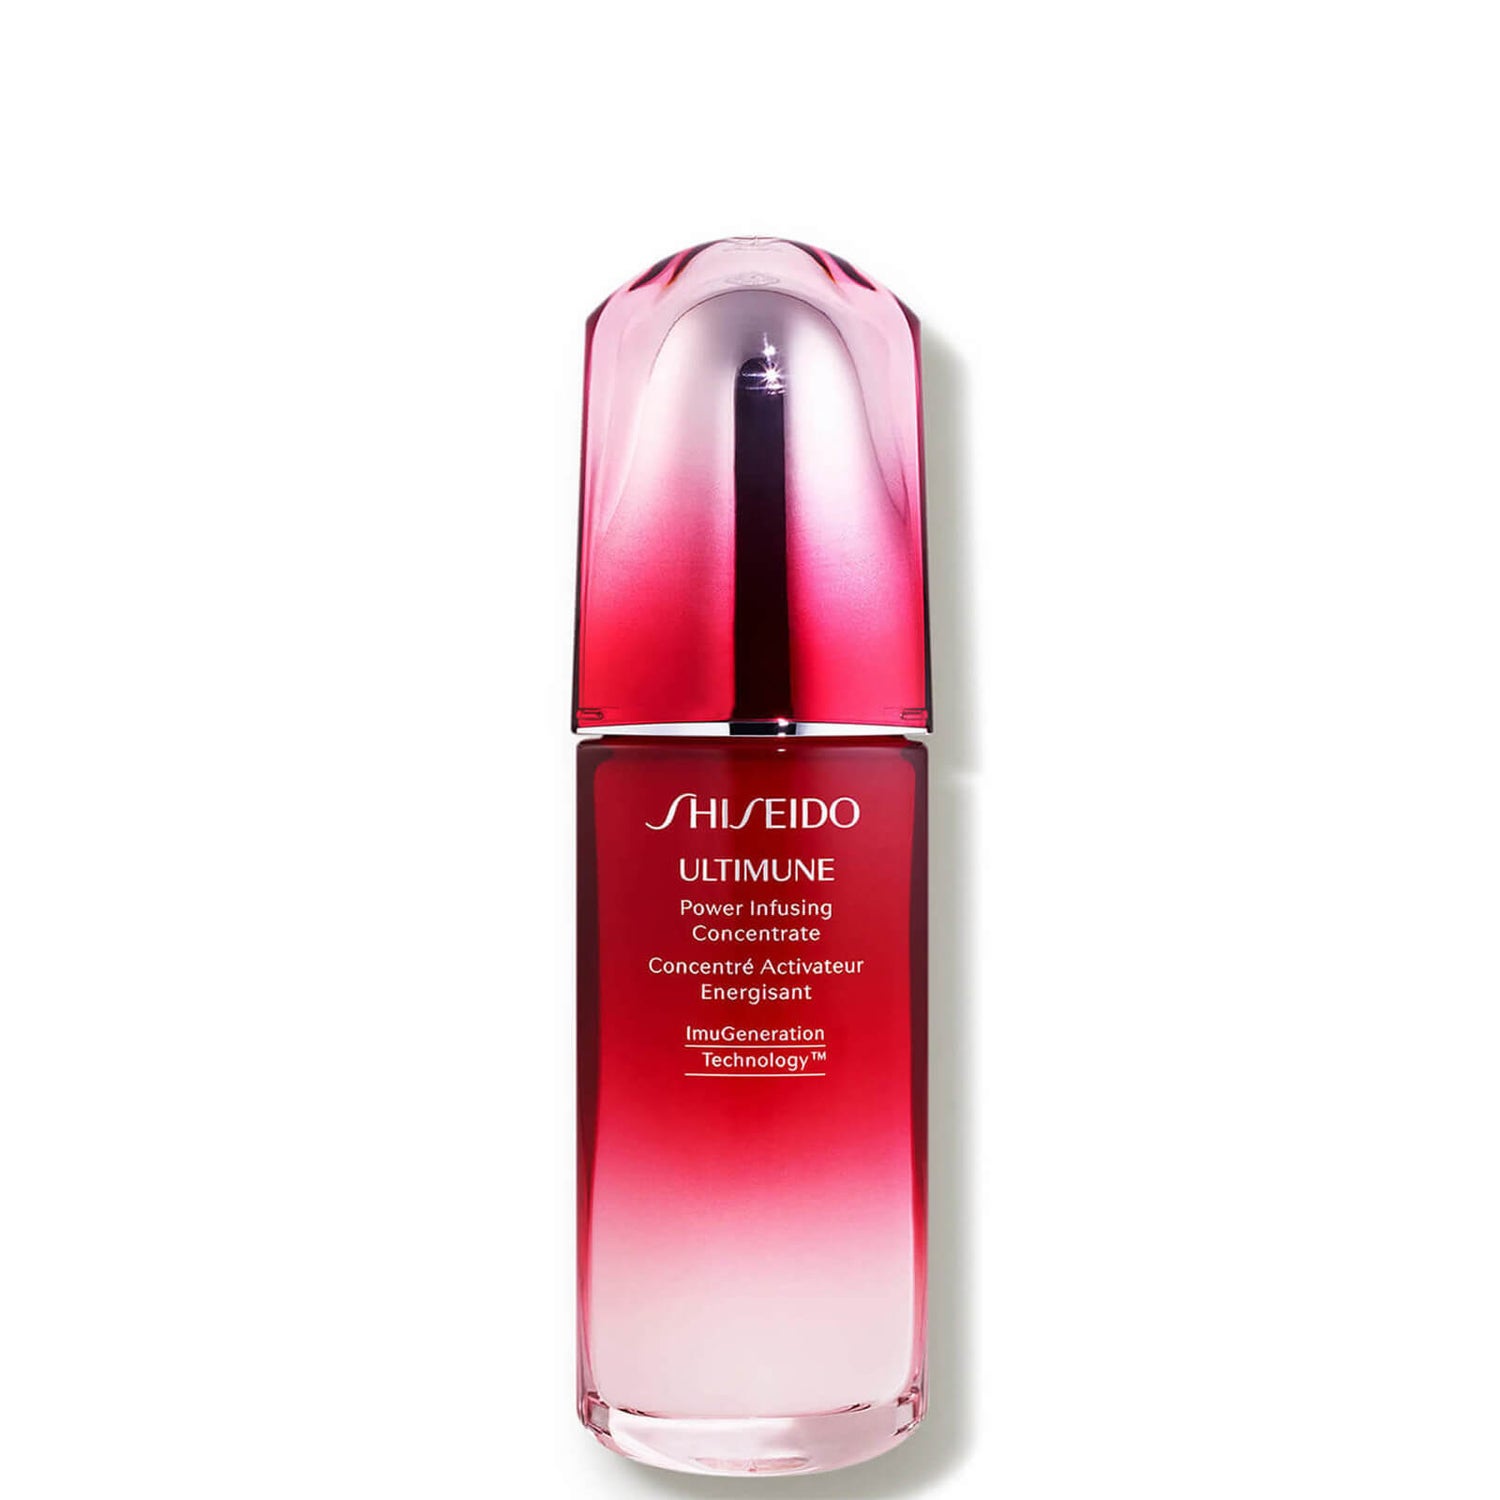 Shiseido Ultimune Power Infusing Concentrate (2.5 fl. oz.)